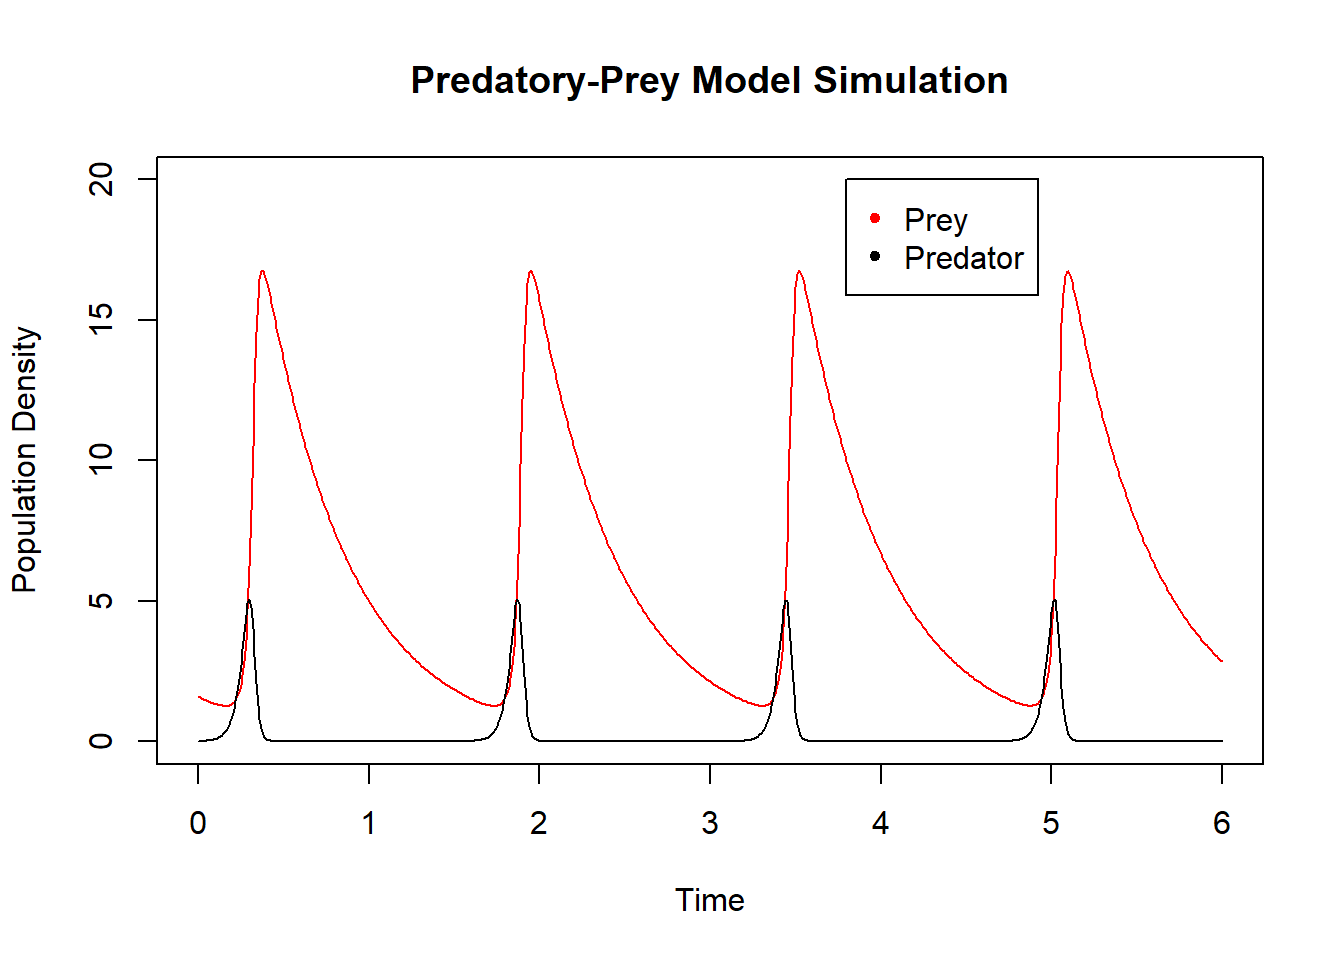 A graph comparing time and population density between predator and prey where each maximum is seen to be at the same time.